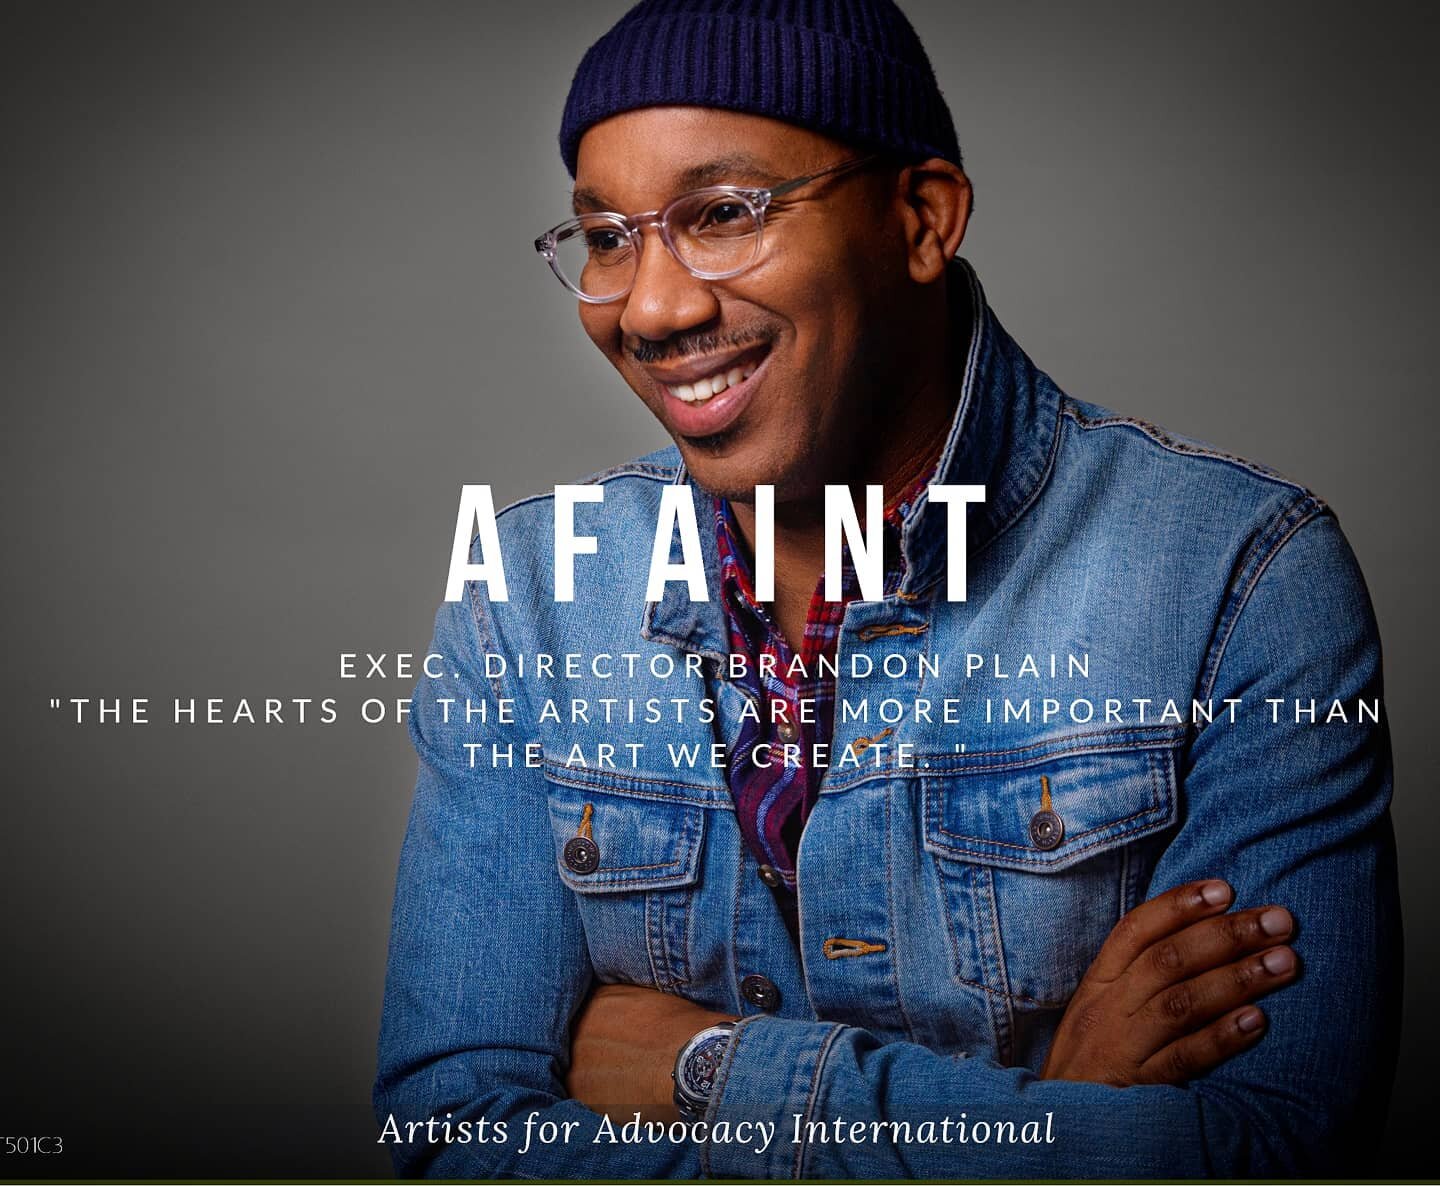 At AFAINT we are challenging ourselves not only to produce the best Art we can but to make sure it can turn into bread and water for others. Stay Tuned as we get set up and situated. 

#501c3 #ngo #nonprofit #nonprofitorganization #art #advocacy #adv